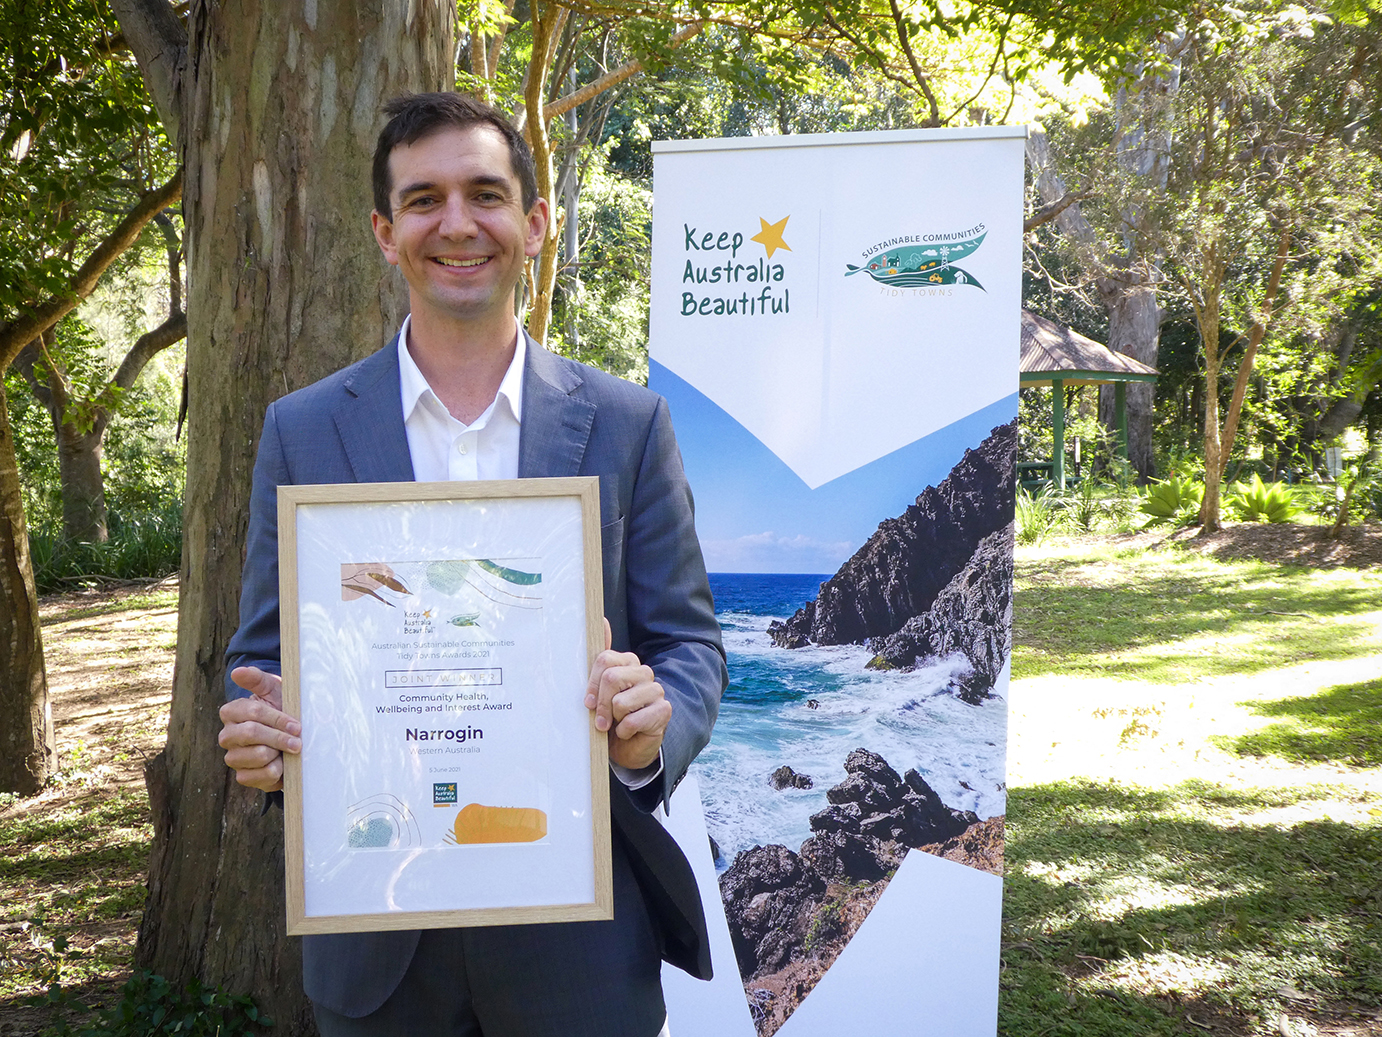 Hon Trevor Evans MP, Assistant Minister for Waste Reduction and Environmental Management with the 2021 Australian Sustainable Communities Tidy Towns Community Health Wellbeing and Interest Award presented to Narrogin, WA (Joint Winner)